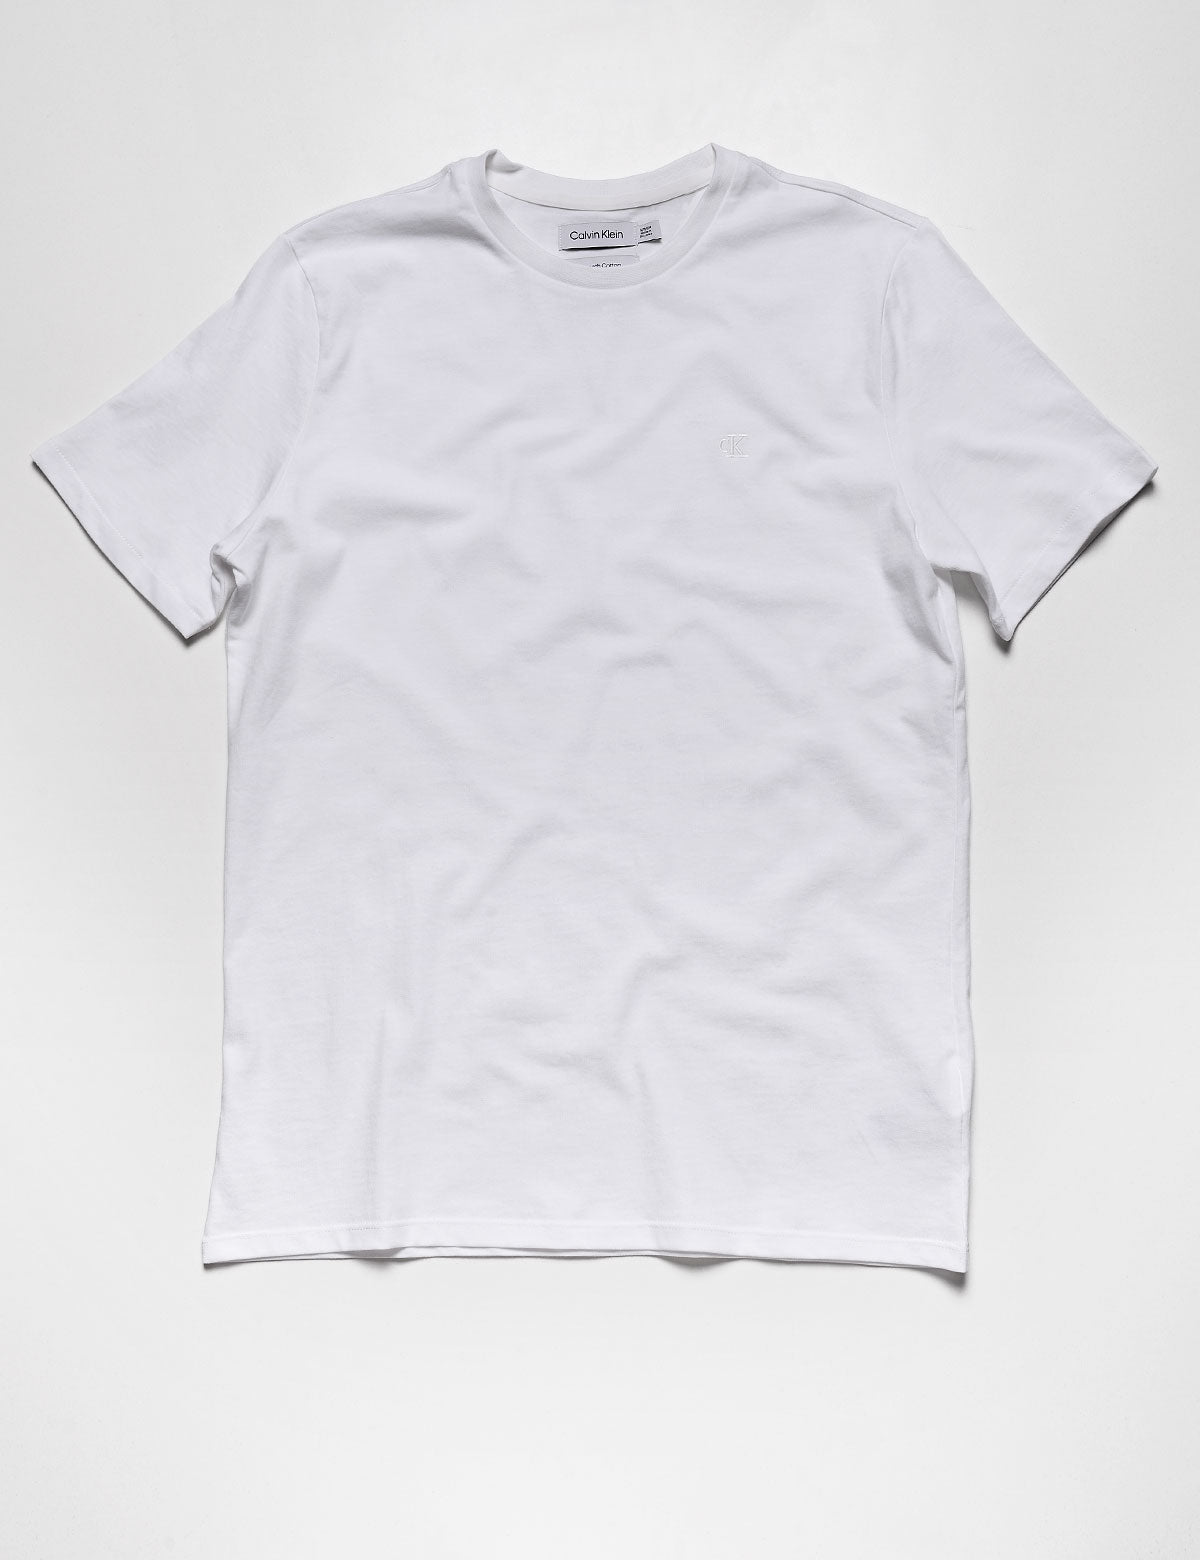 Brilliant Tailors White - Short Brooklyn Sleeve Tee – Cotton Smooth Solid Crewneck